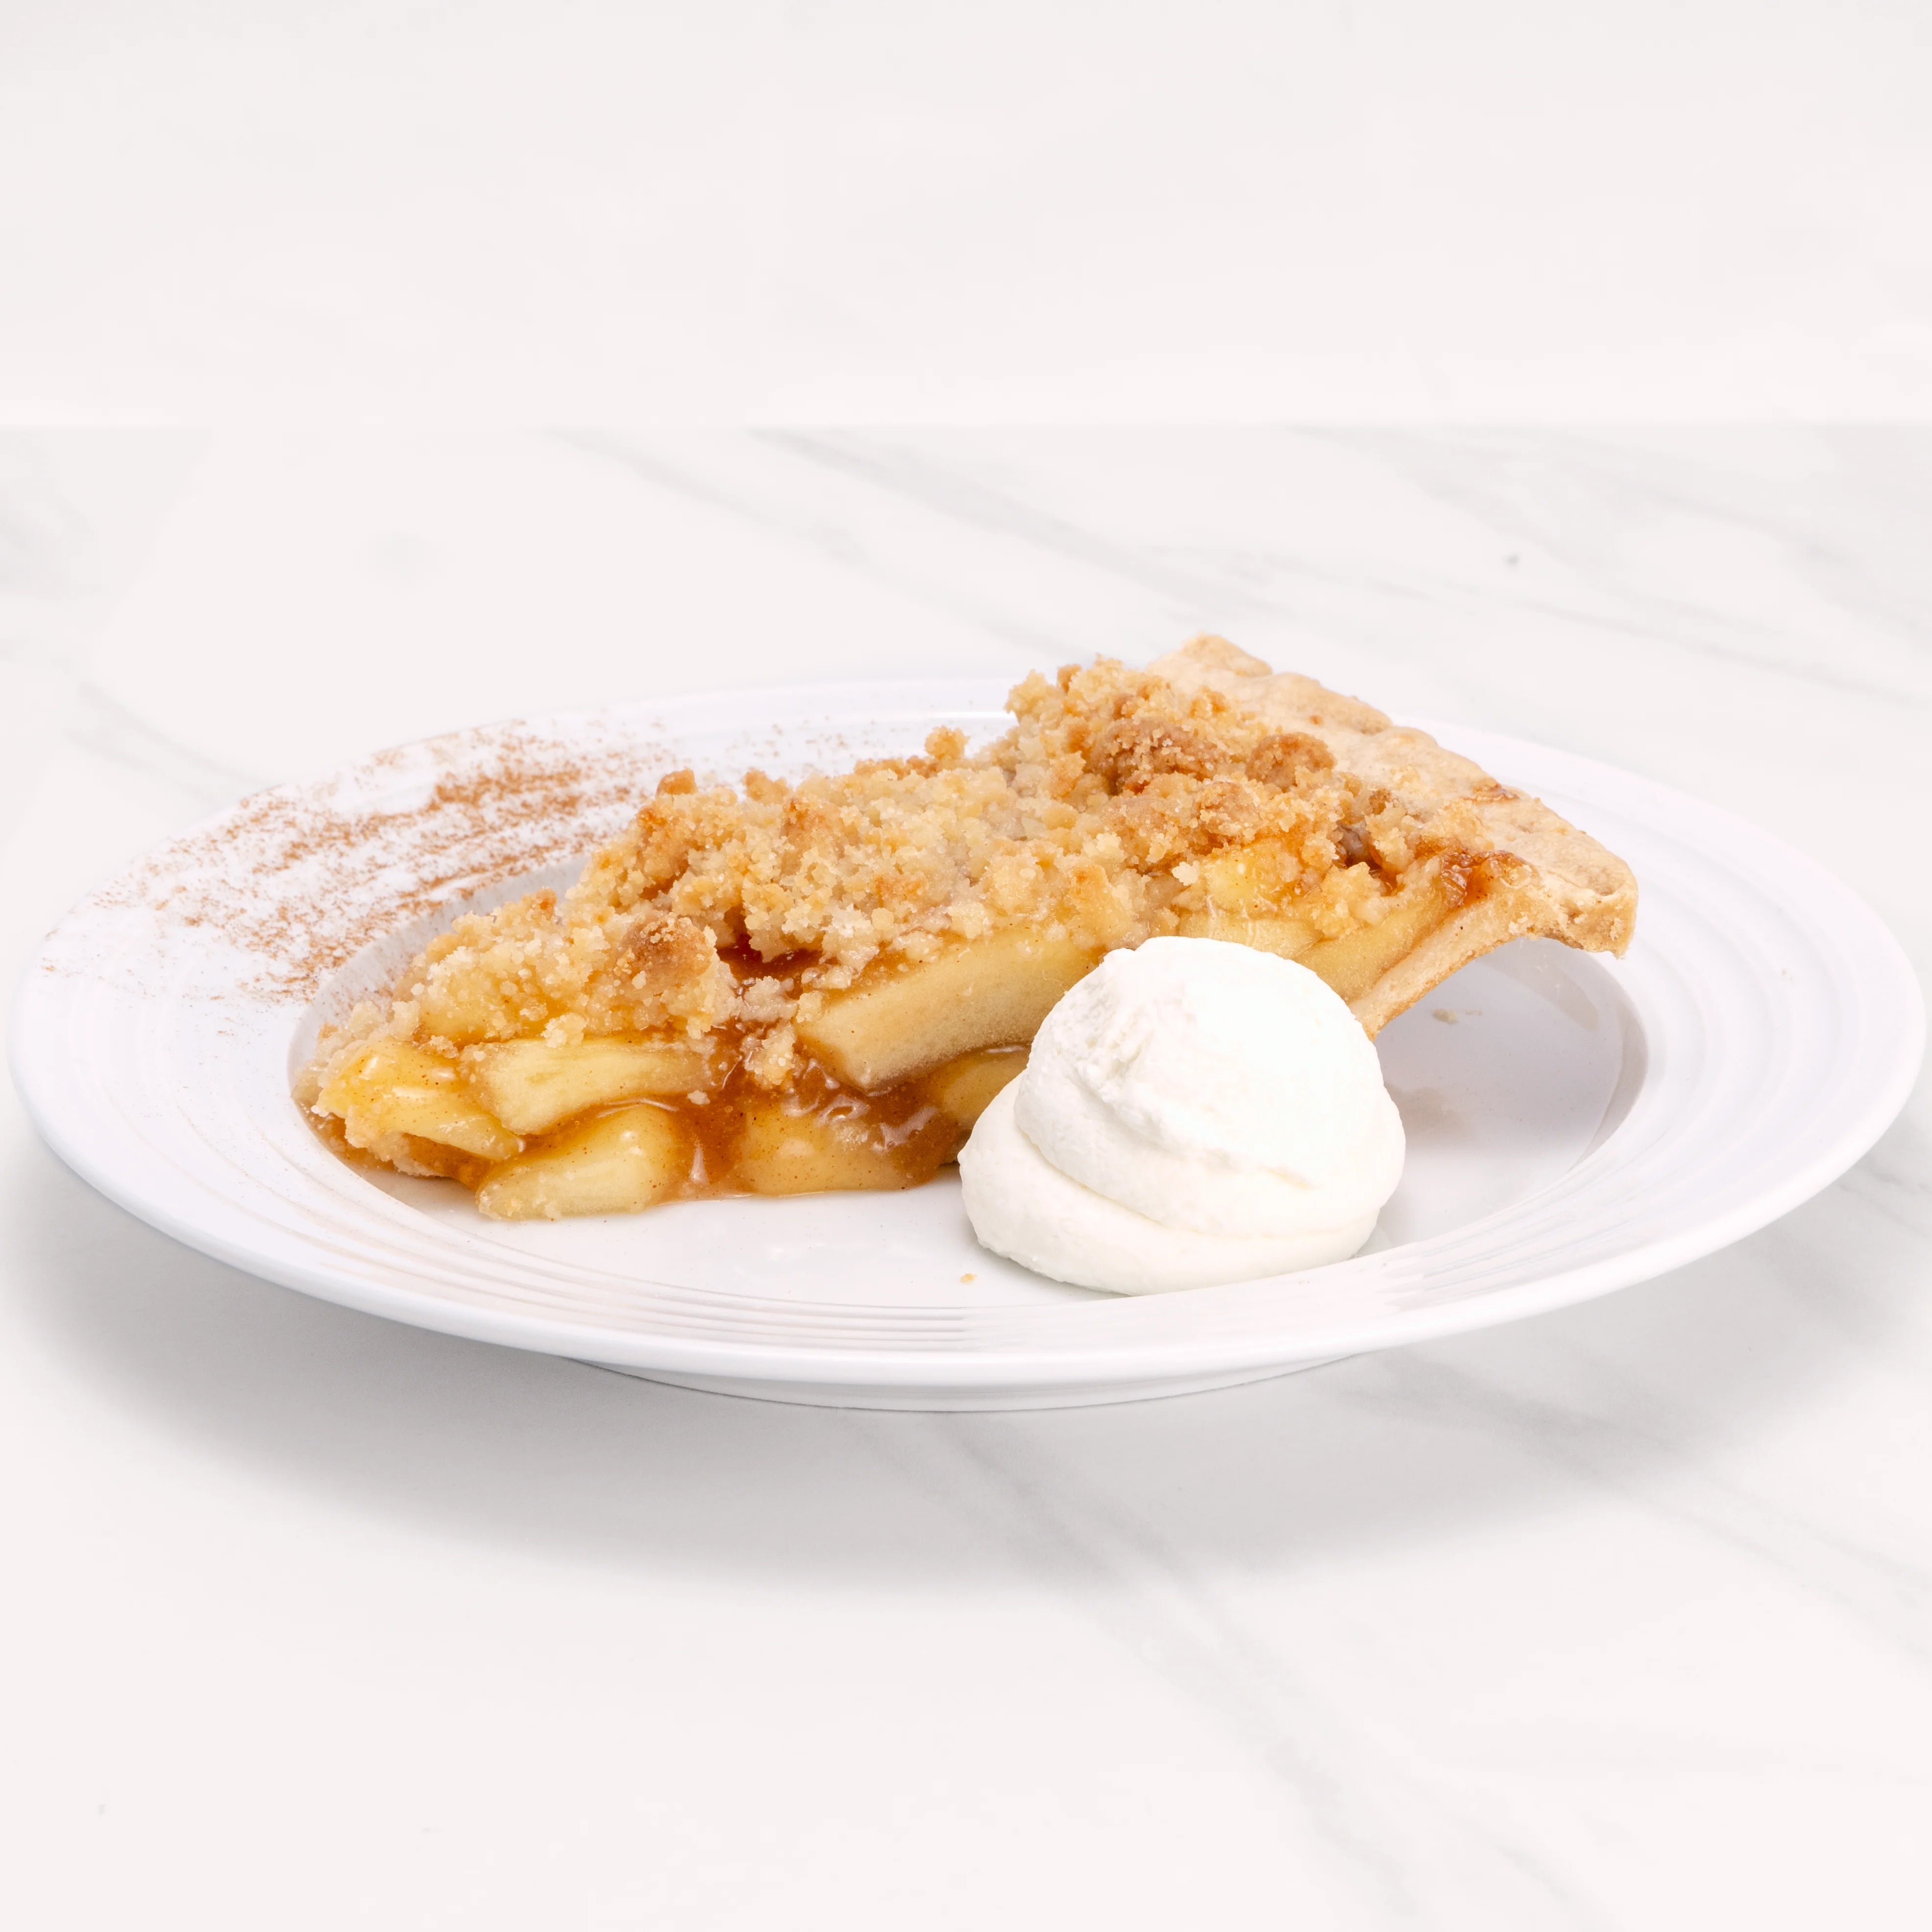 Slice of Apple Crumb Pie garnished with cinnamon and a dollop of crème.